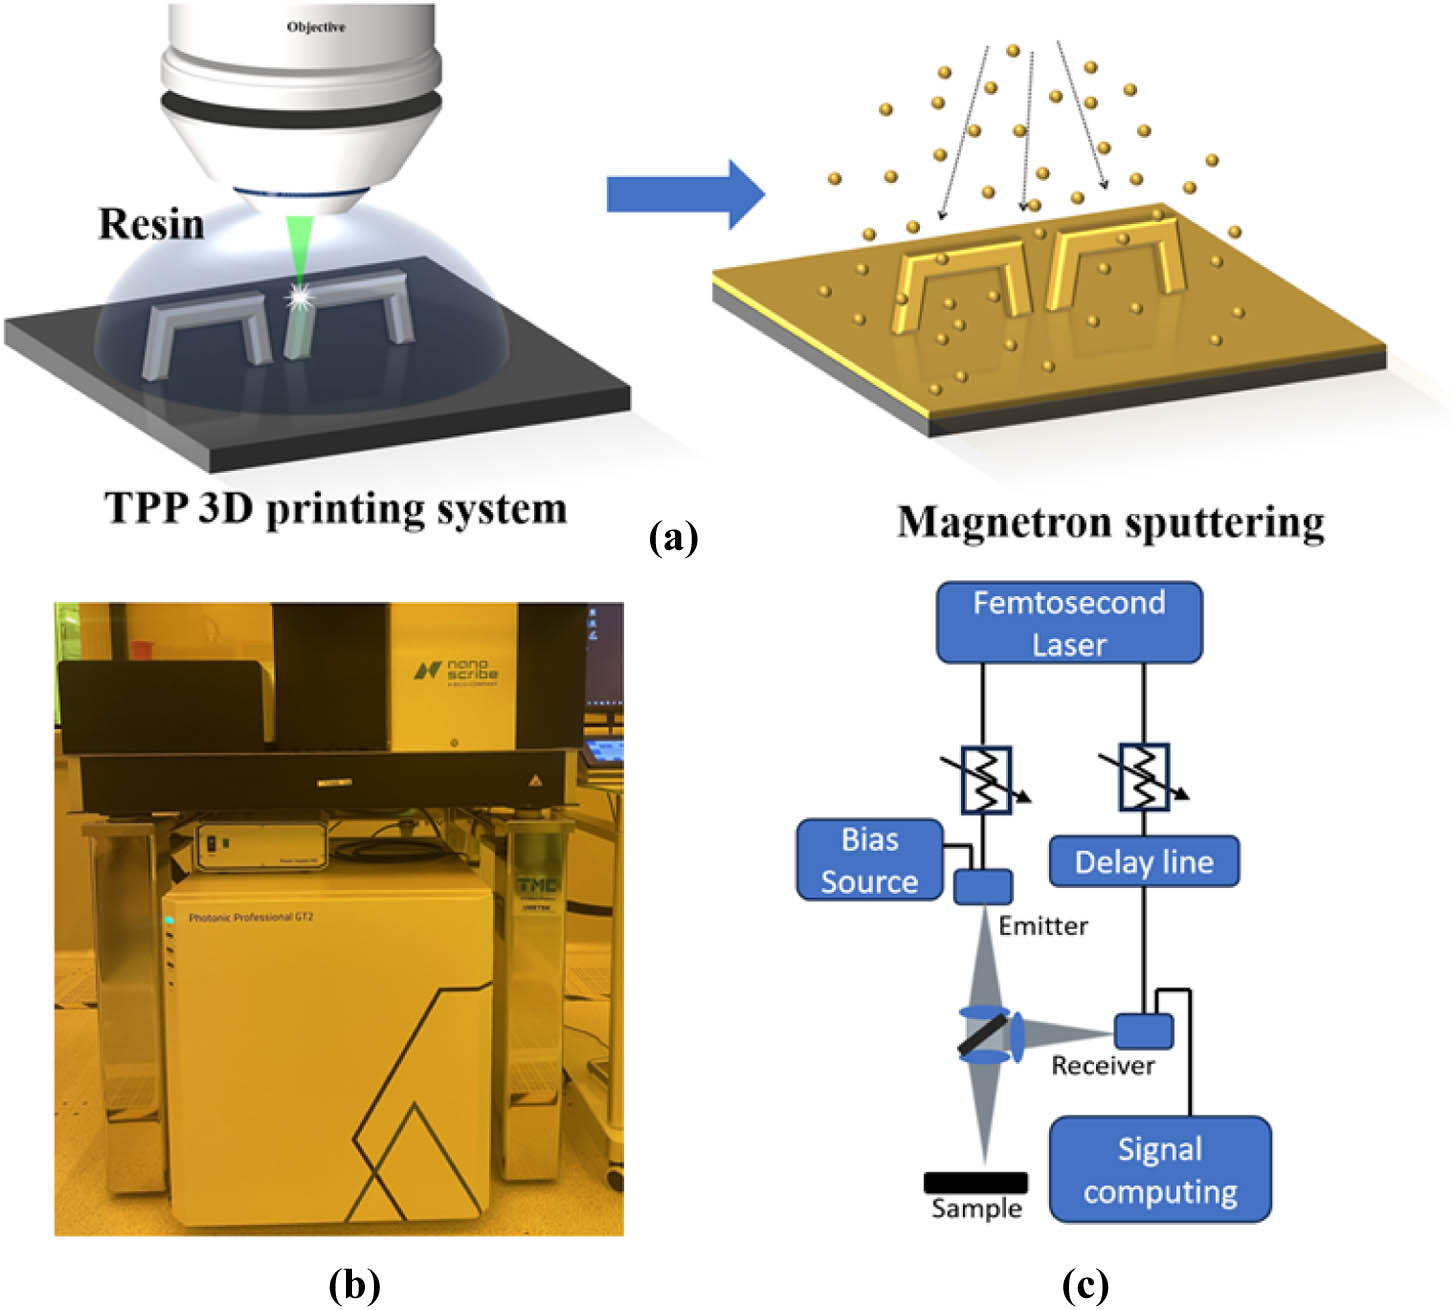 (a) Fabrication process of the proposed terahertz meta-absorber. (b) Photograph of TPP 3D printing system. (c) Reflection mode of THz-TDS system.